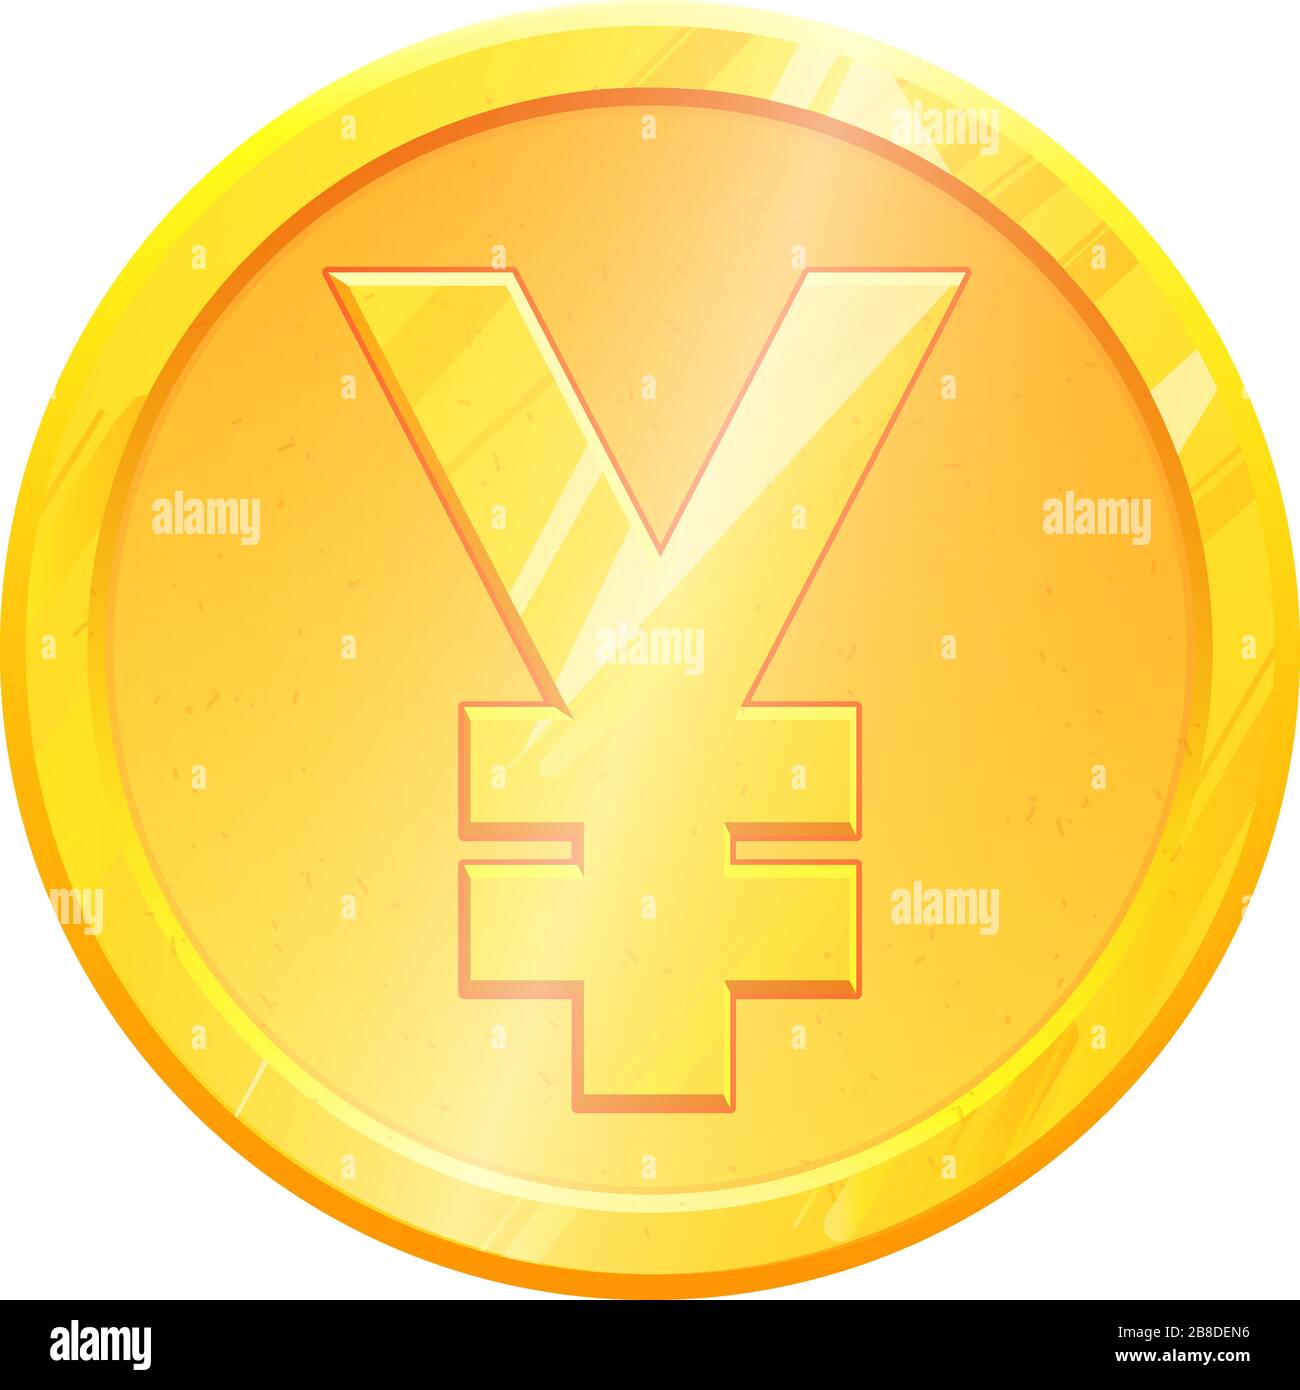 JPY Golden Yen coin symbol on white background. Finance investment concept. Exchange Japan currency Money banking illustration. Business income earnings. Financial sign stock vector. Stock Vector